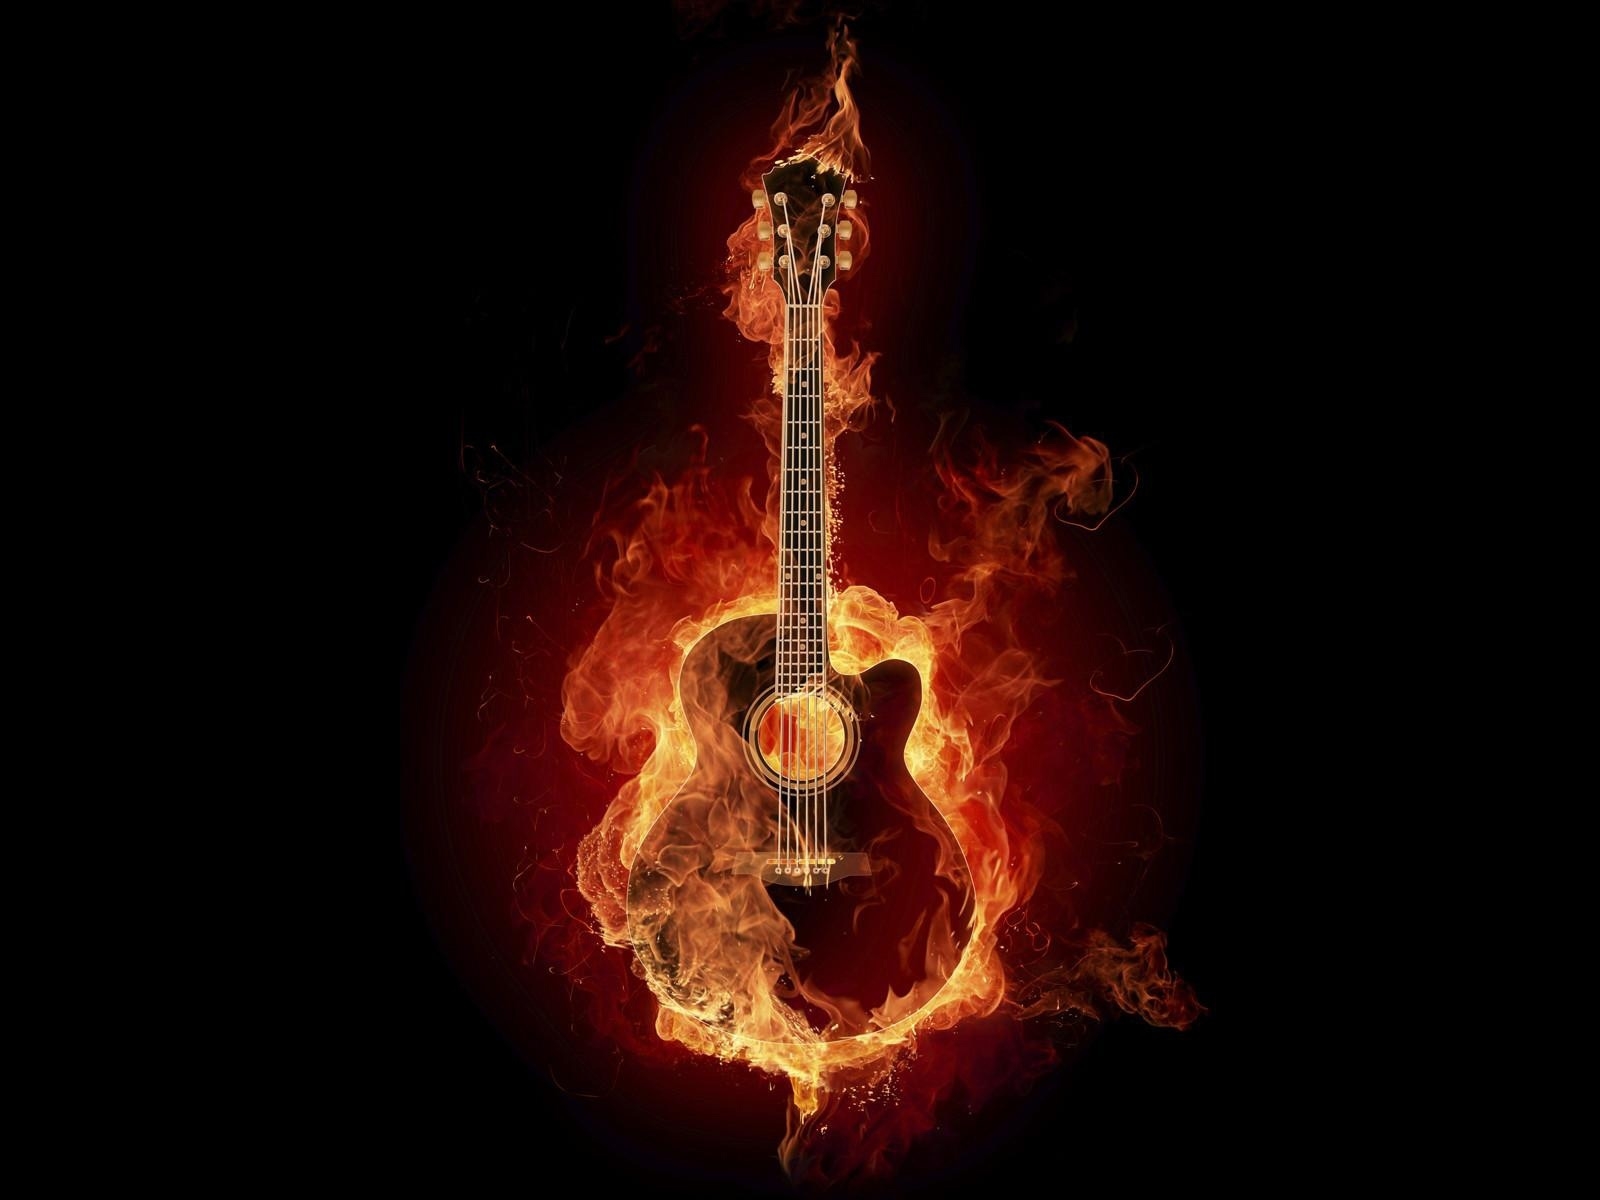 Great Fire Guitar for 1600 x 1200 resolution